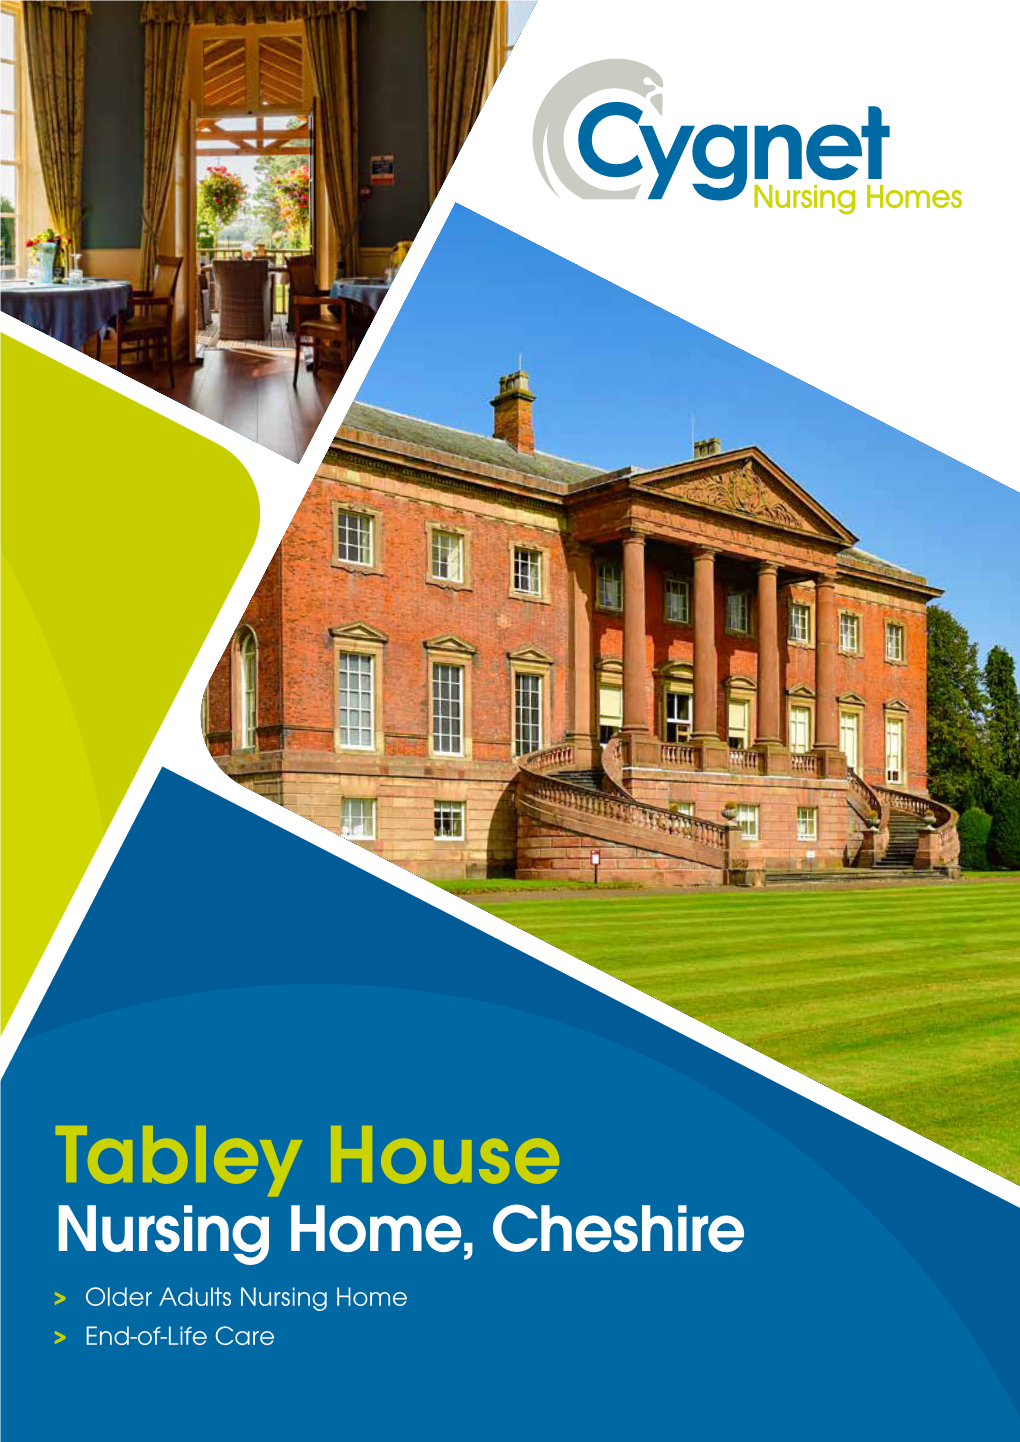 Tabley House Nursing Home, Cheshire